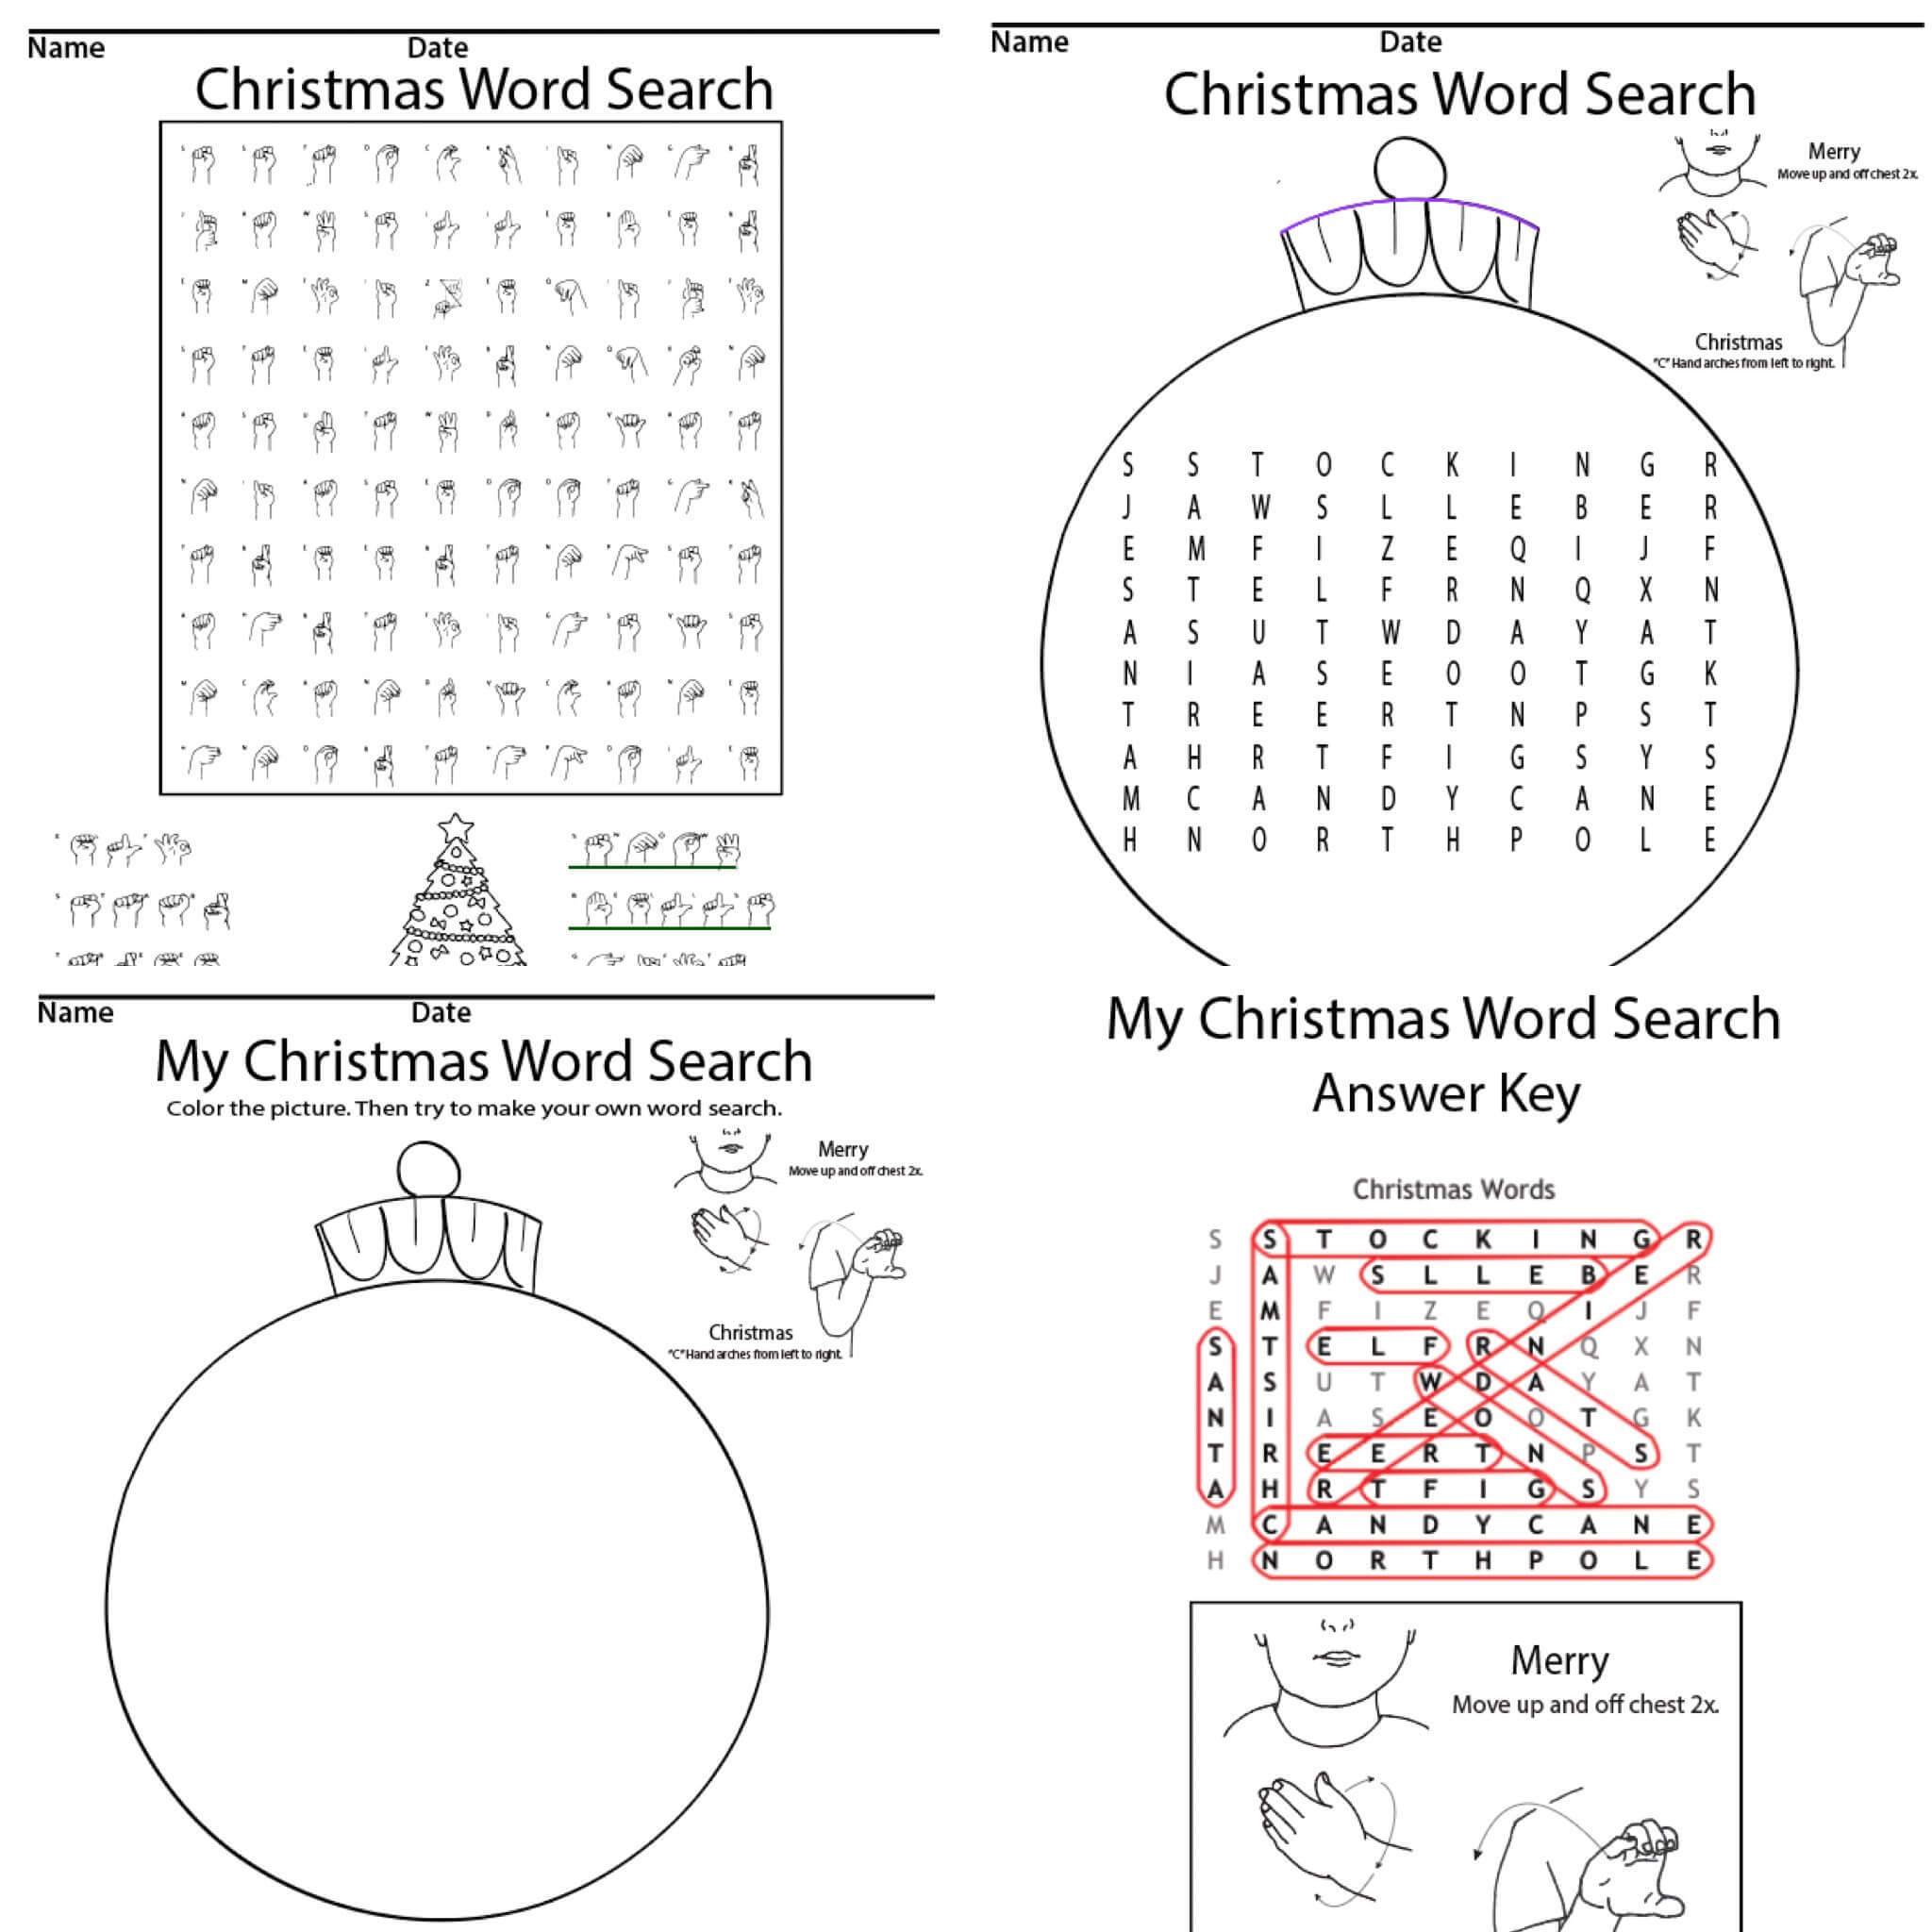 Christmas Word Search ASL Teaching Resources